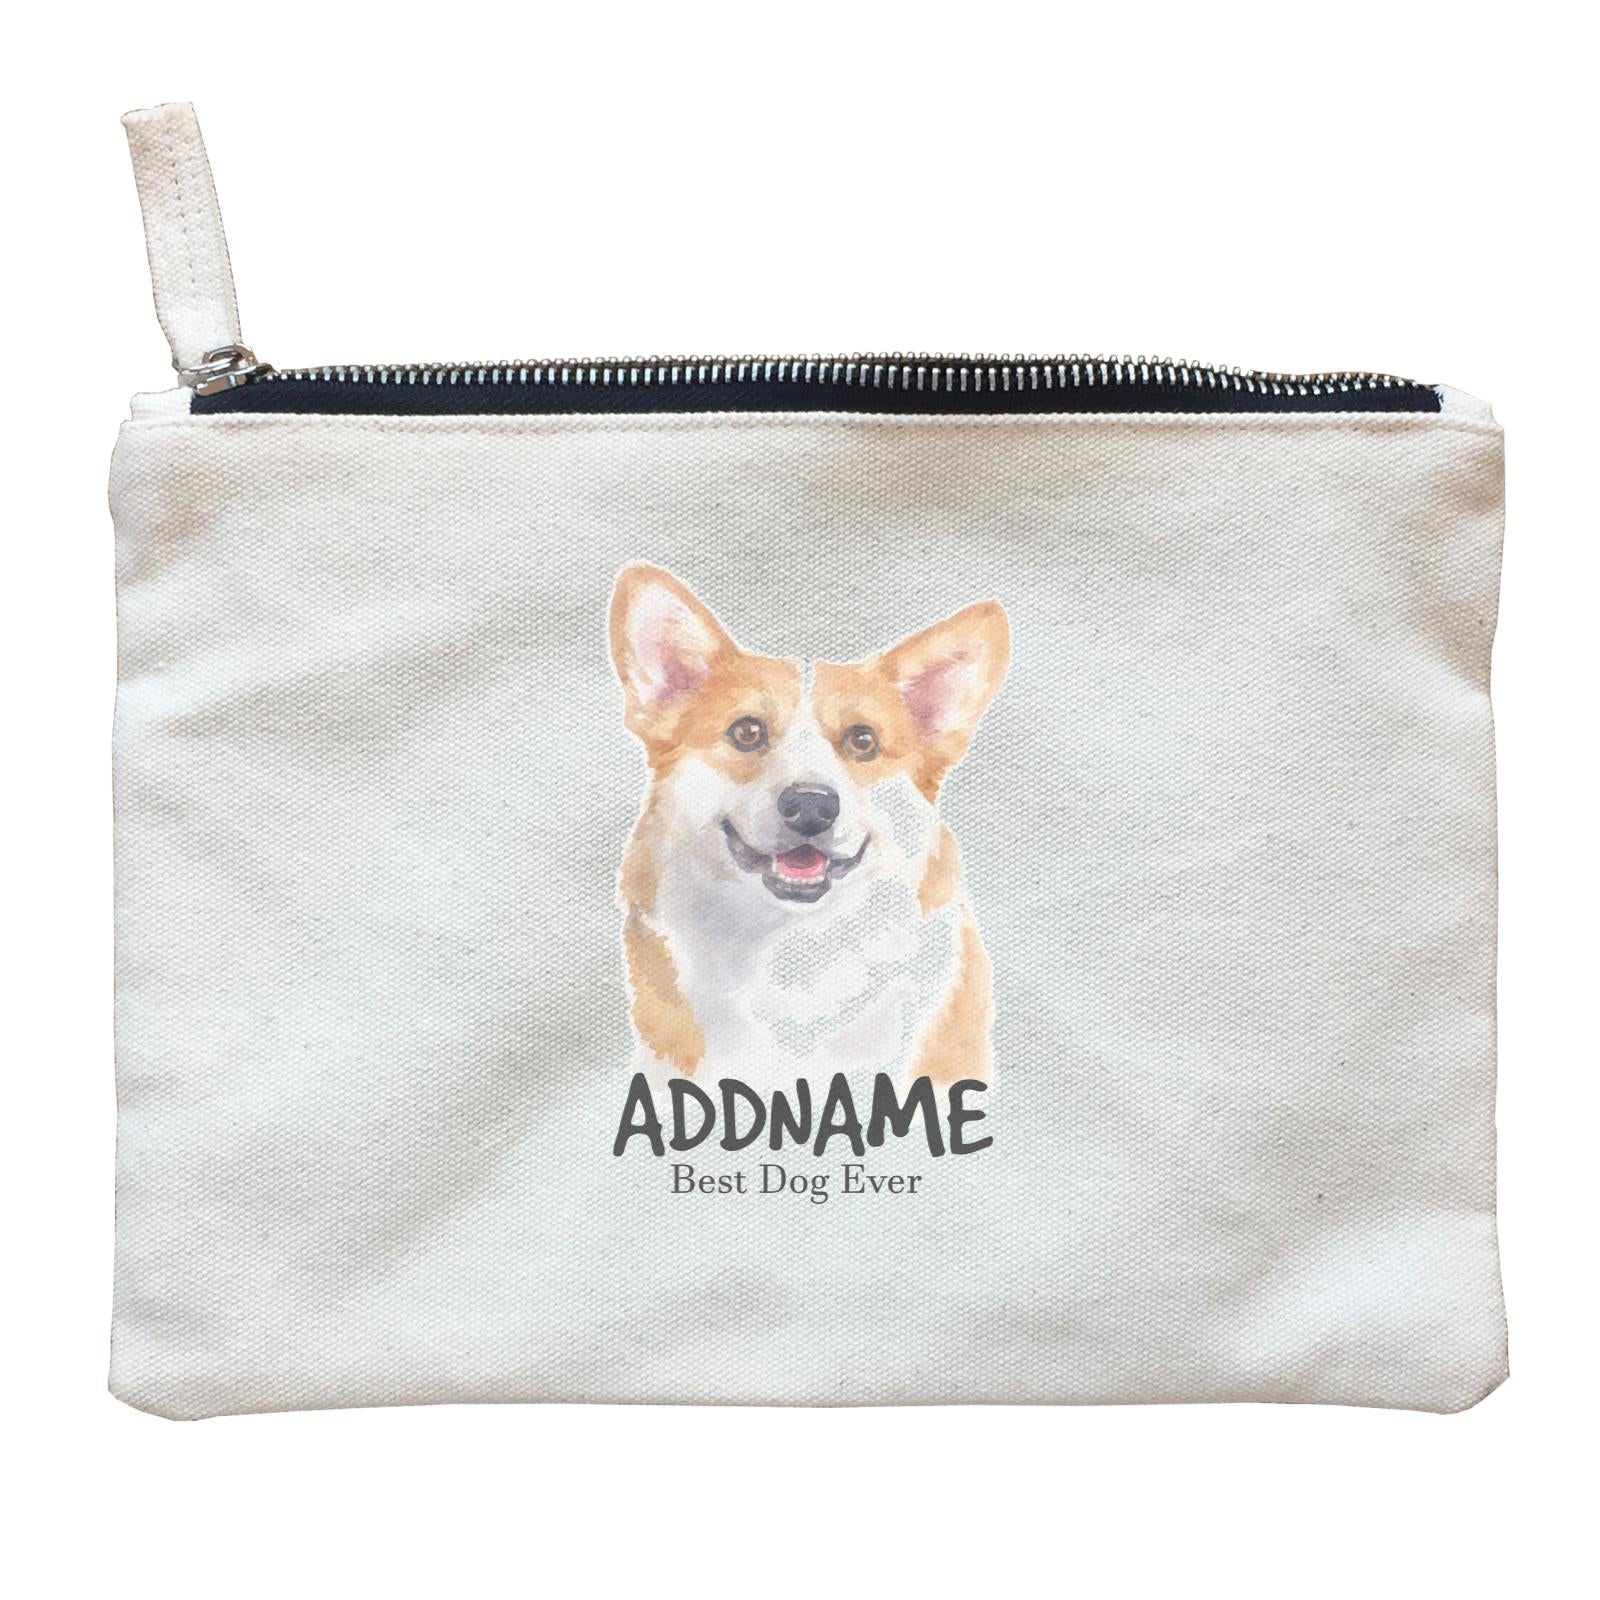 Watercolor Dog Welsh Corgi Smile Best Dog Ever Addname Zipper Pouch